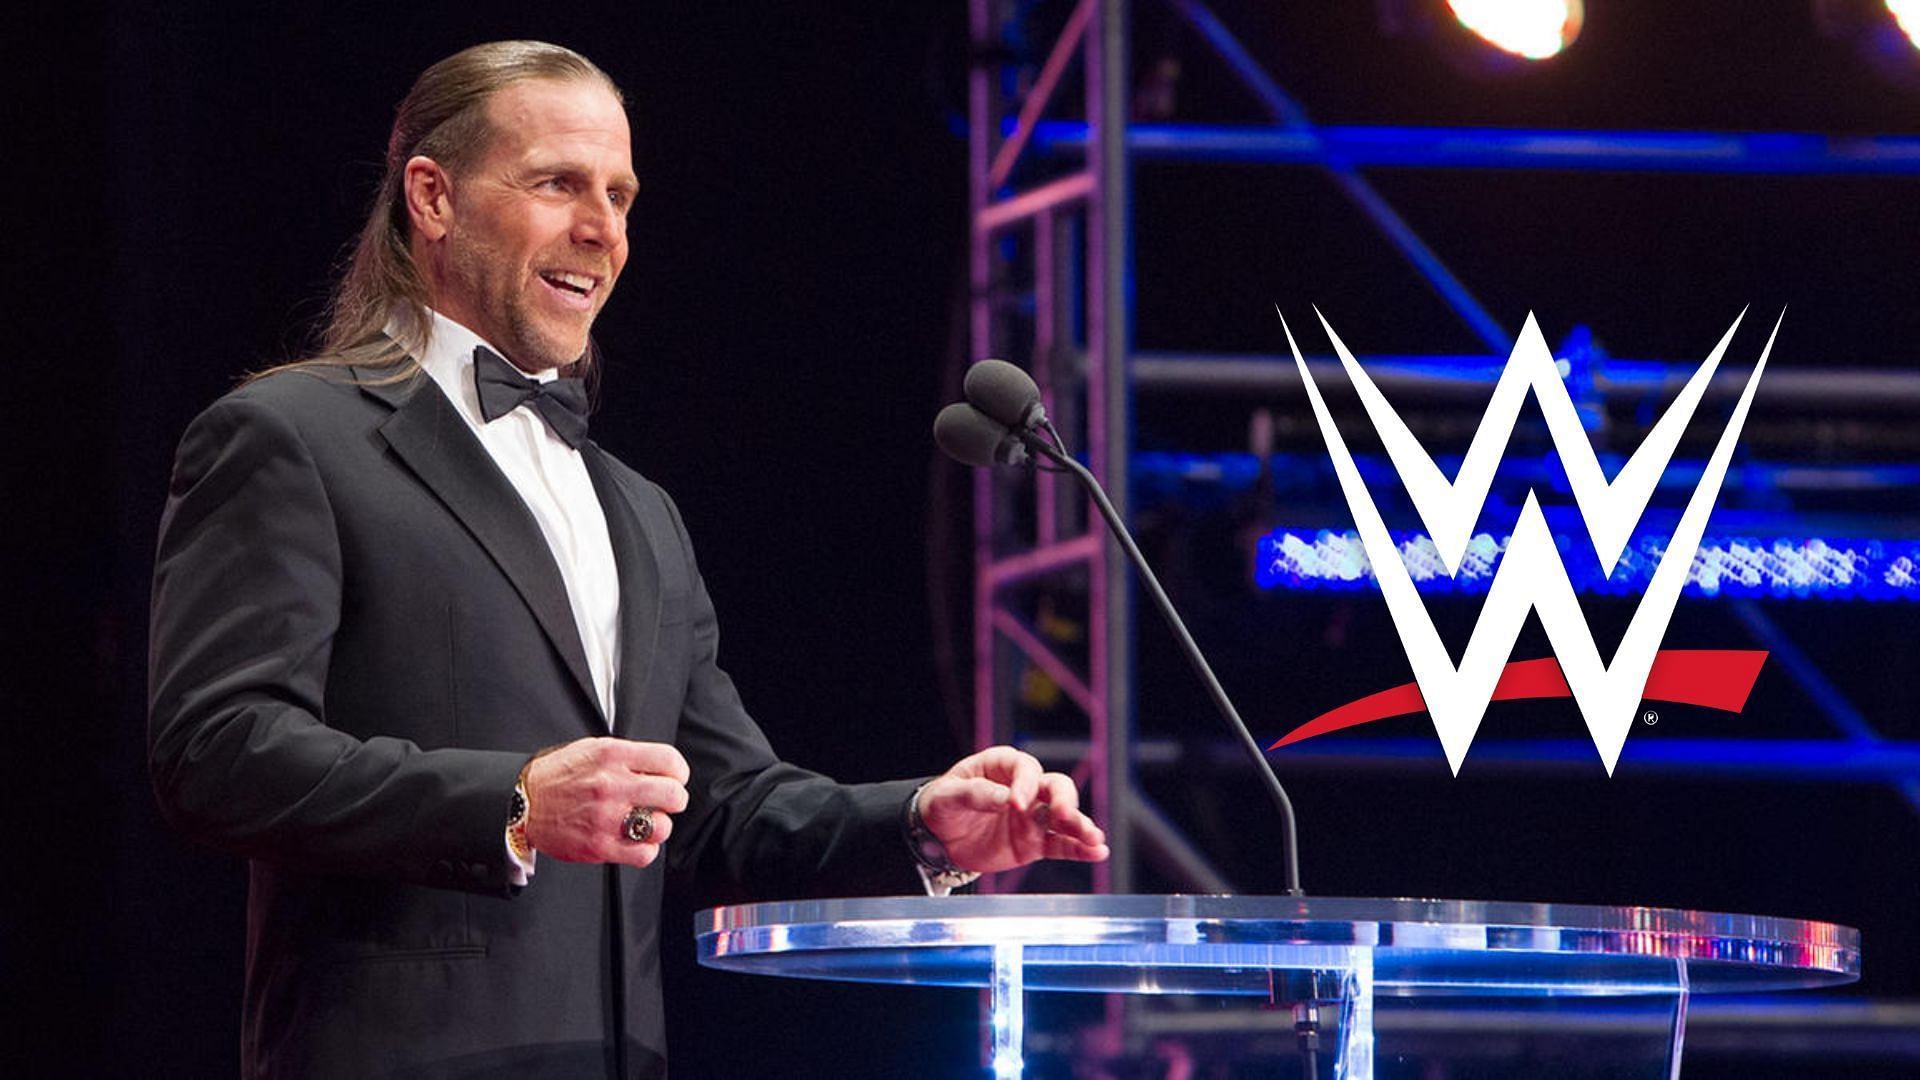 "That was a huge risk" - Shawn Michaels believes match against WWE Hall of Famer deserves more credit